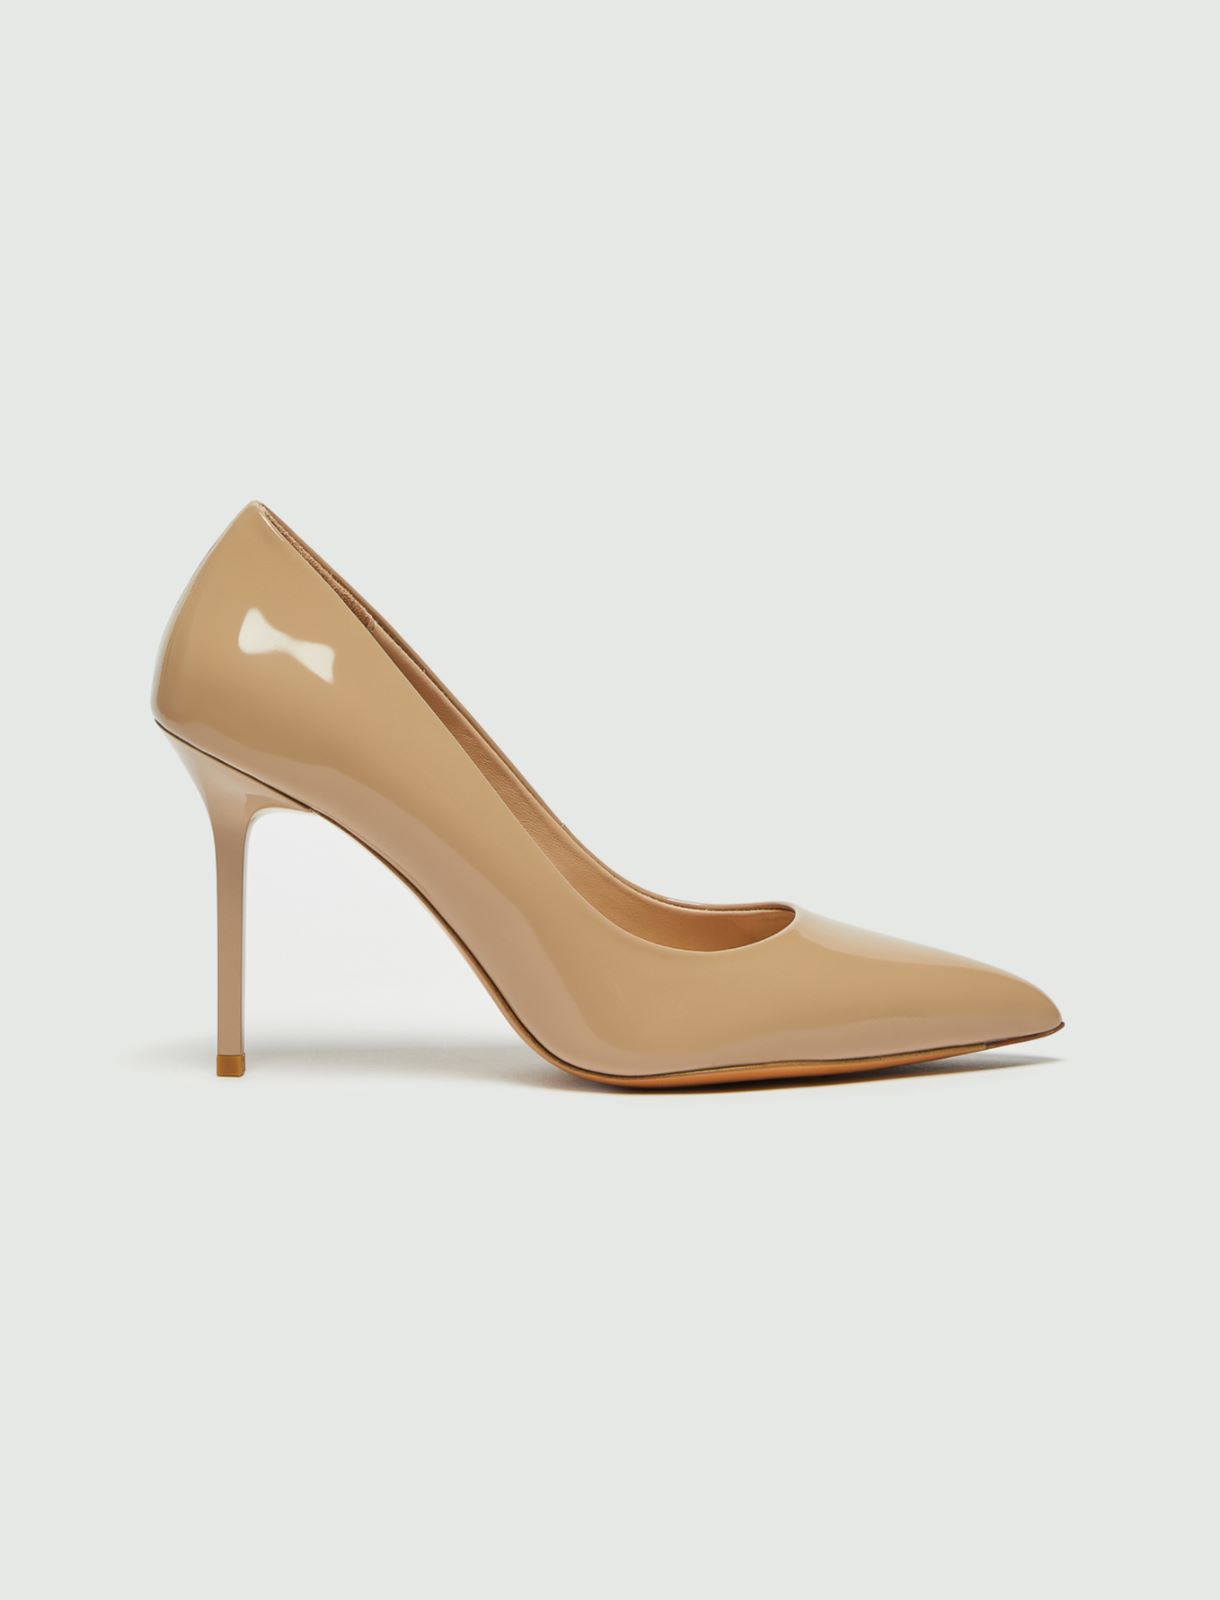 Patent leather court shoes - Nudo - Marella